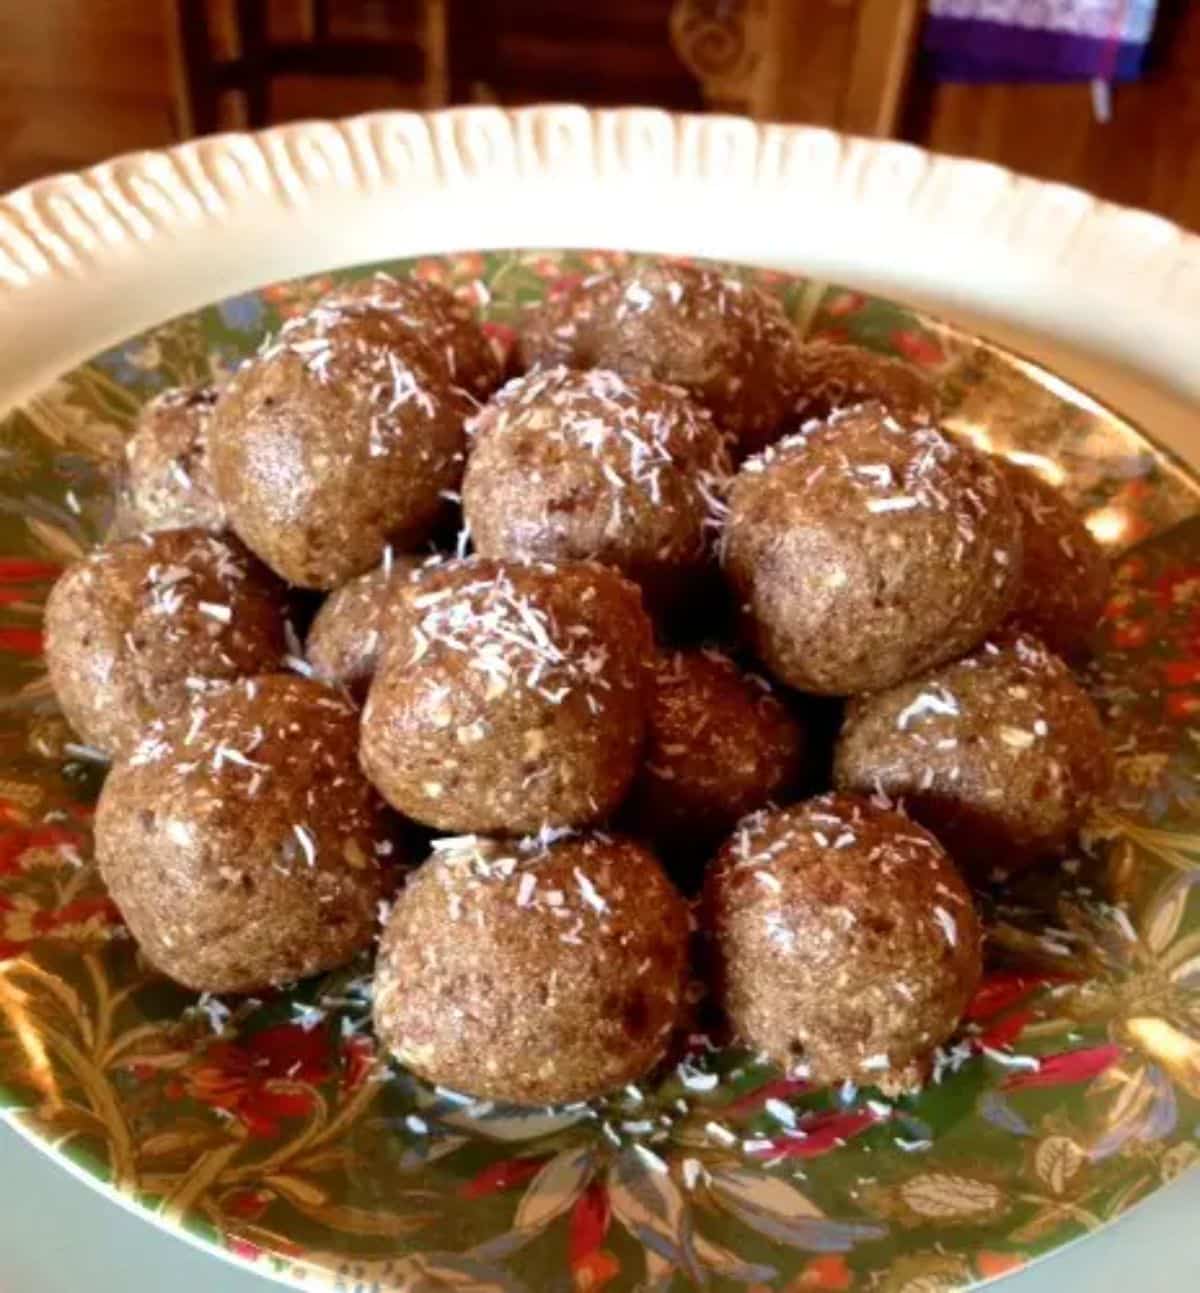 Flavorful almond joy protein balls on a colorful plate.